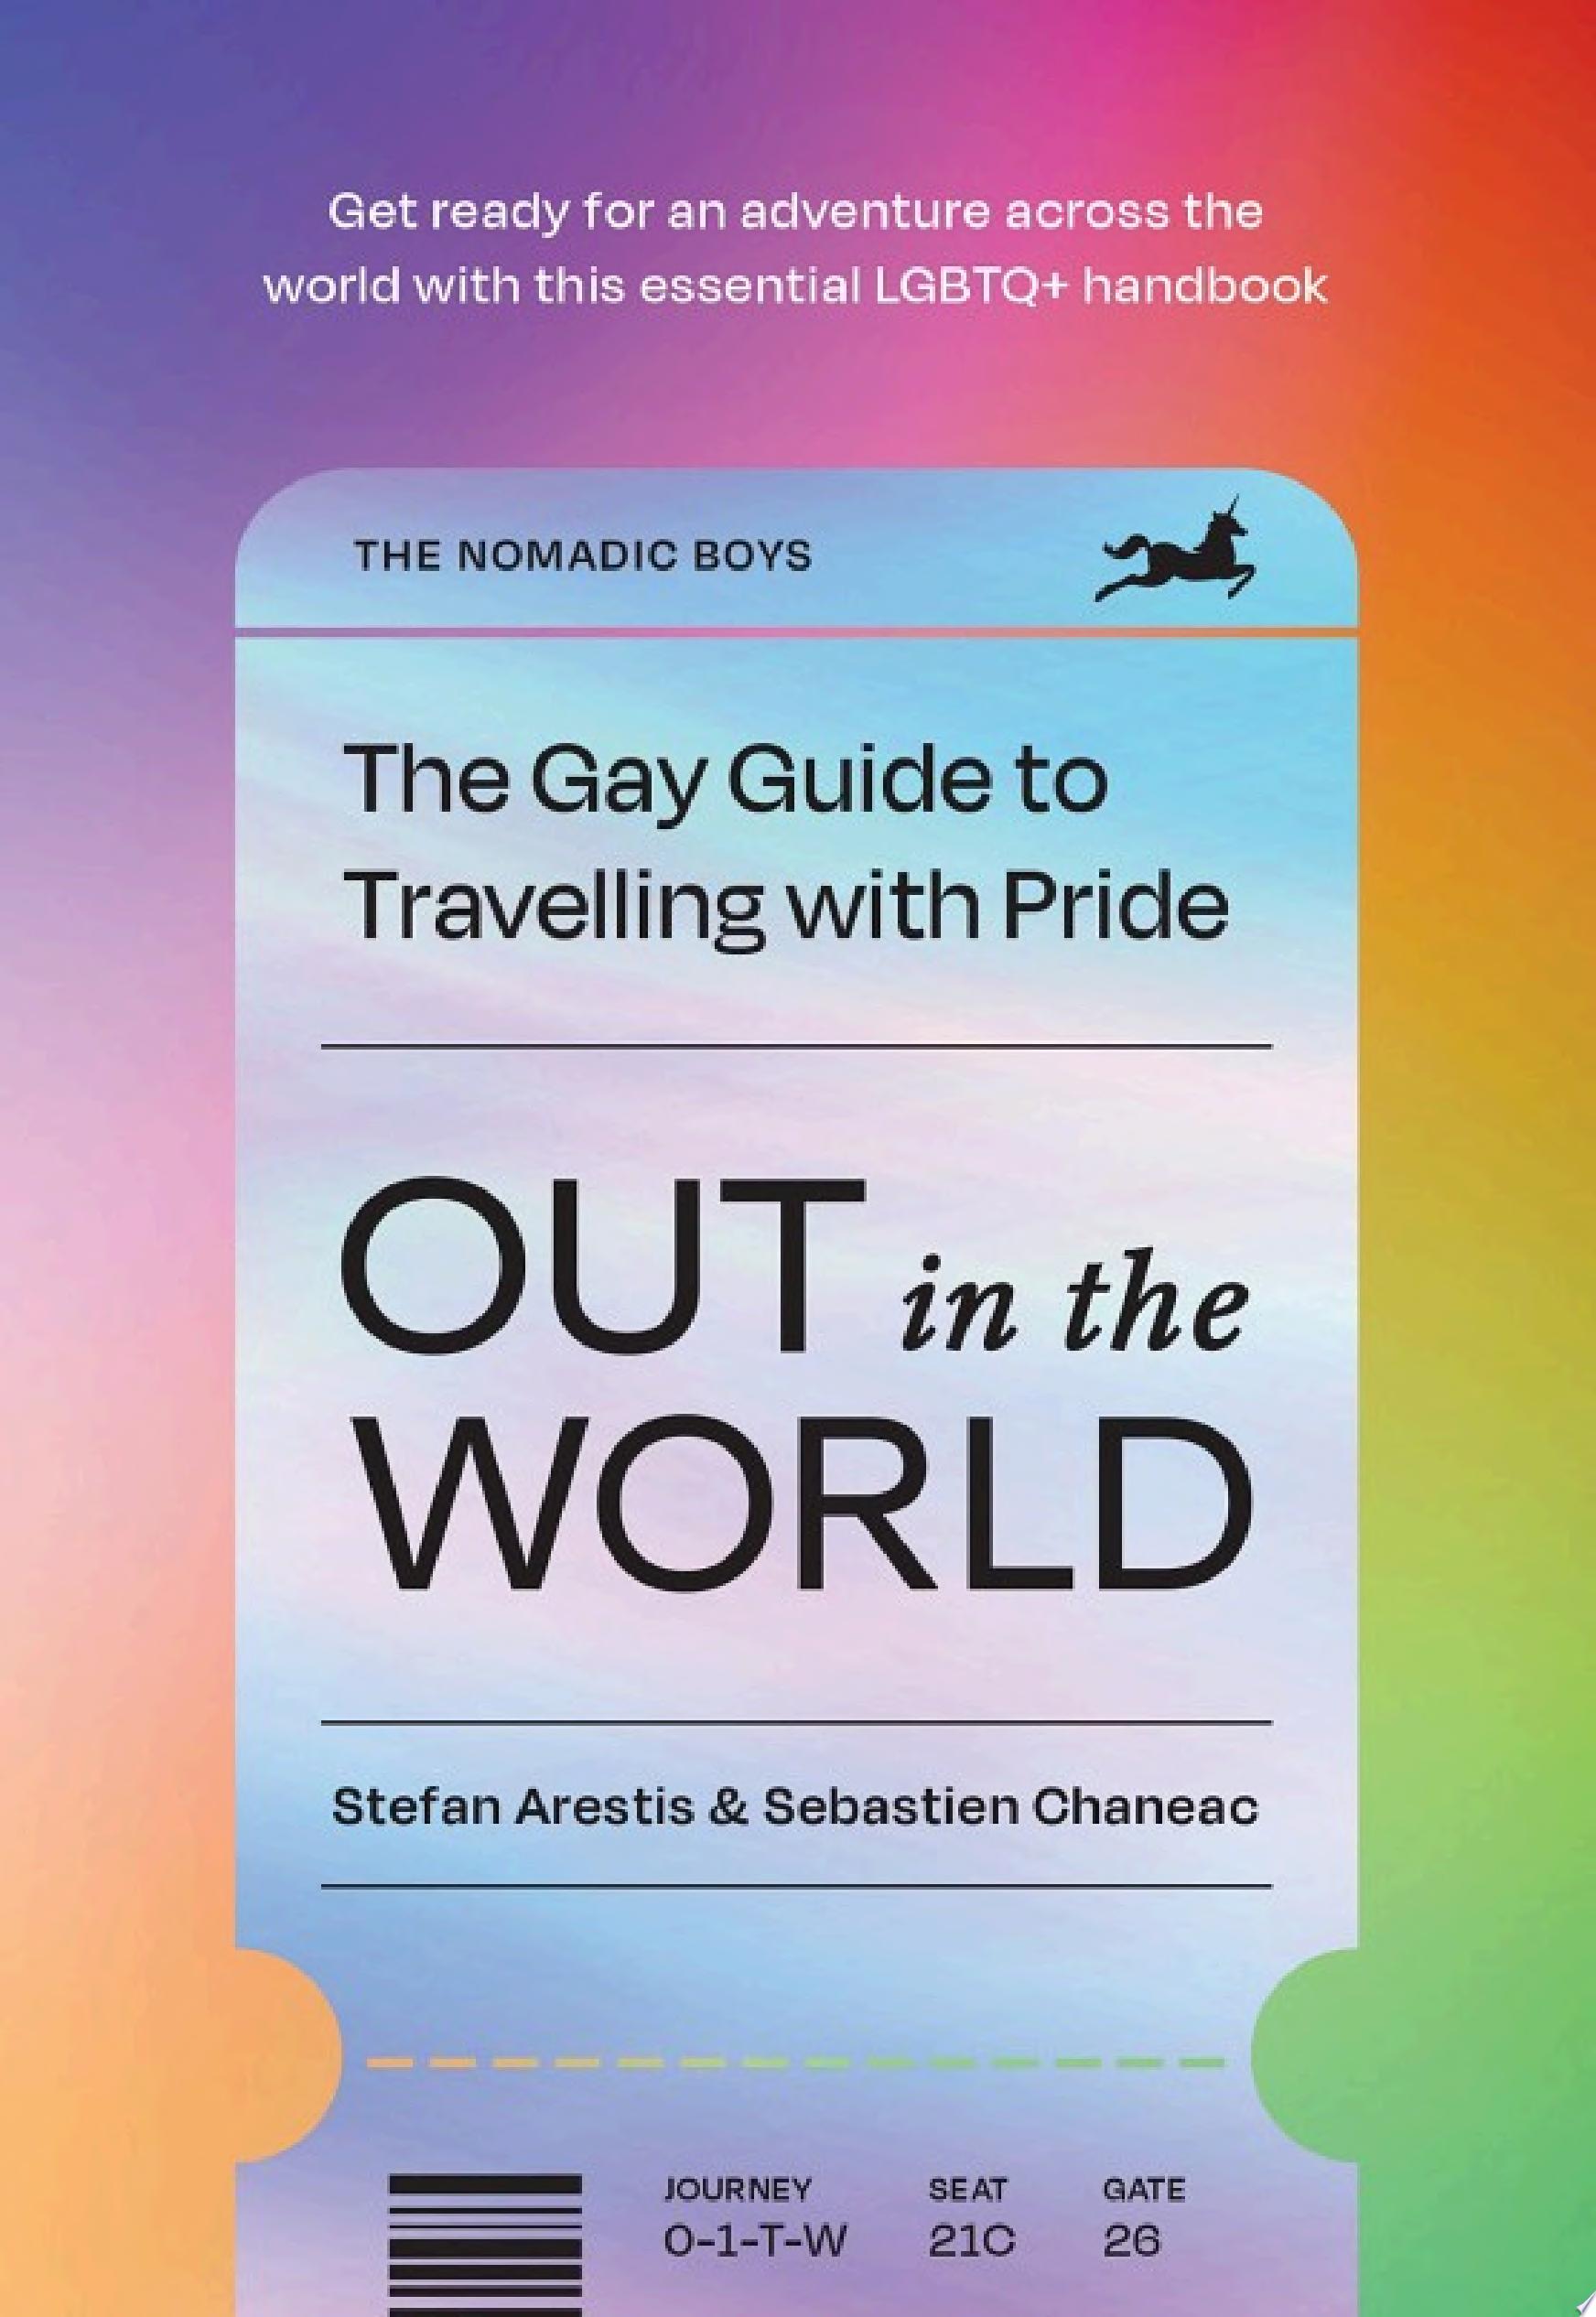 Image for "Out in the World: The Gay Guide to Travelling with Pride"